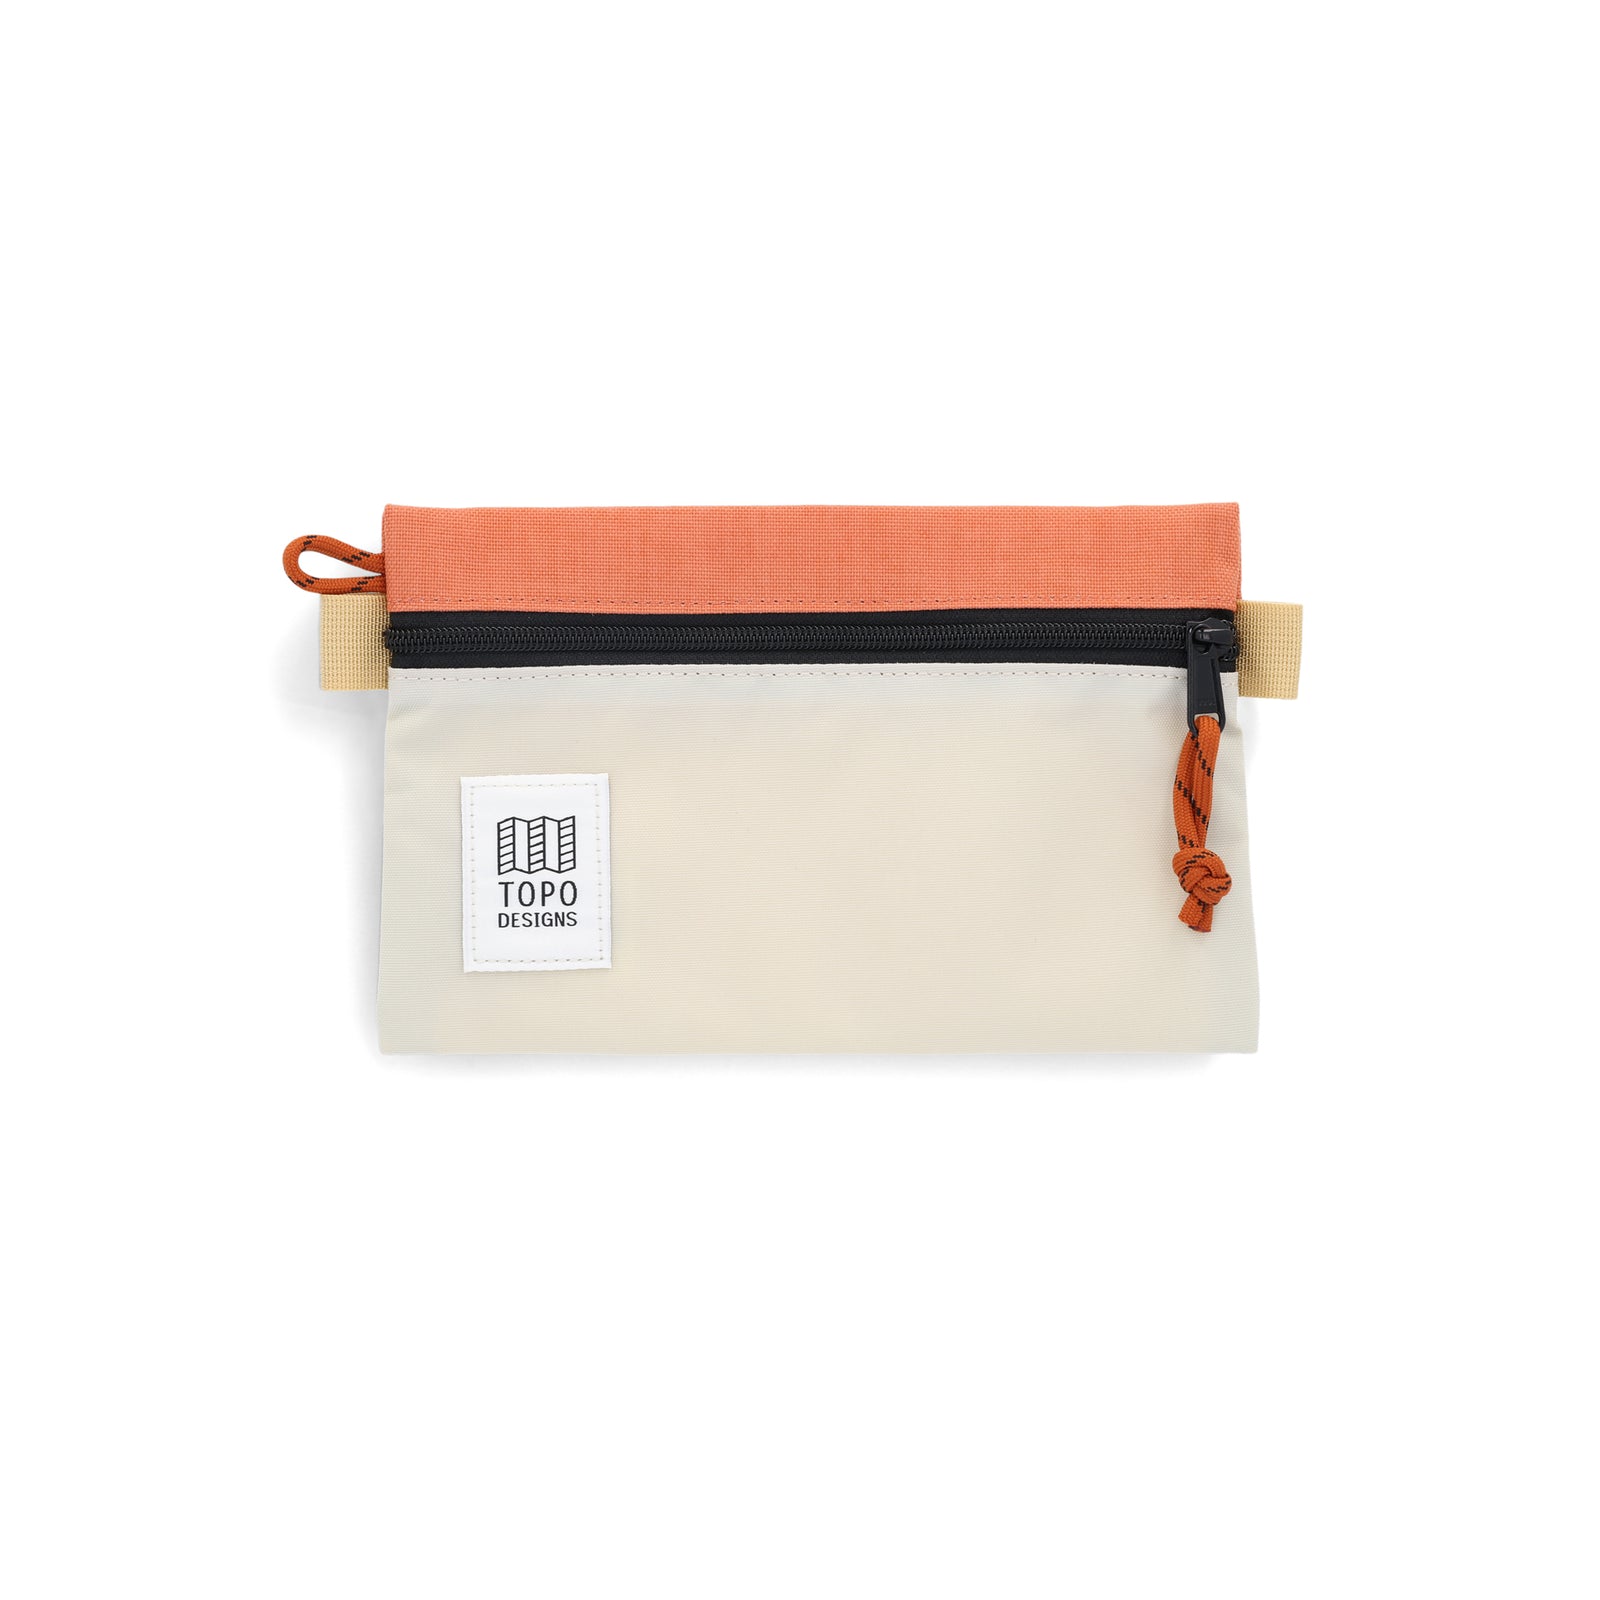 Topo Designs Accessory Bag in "Small" "Bone White / Coral - Recycled" pink nylon.